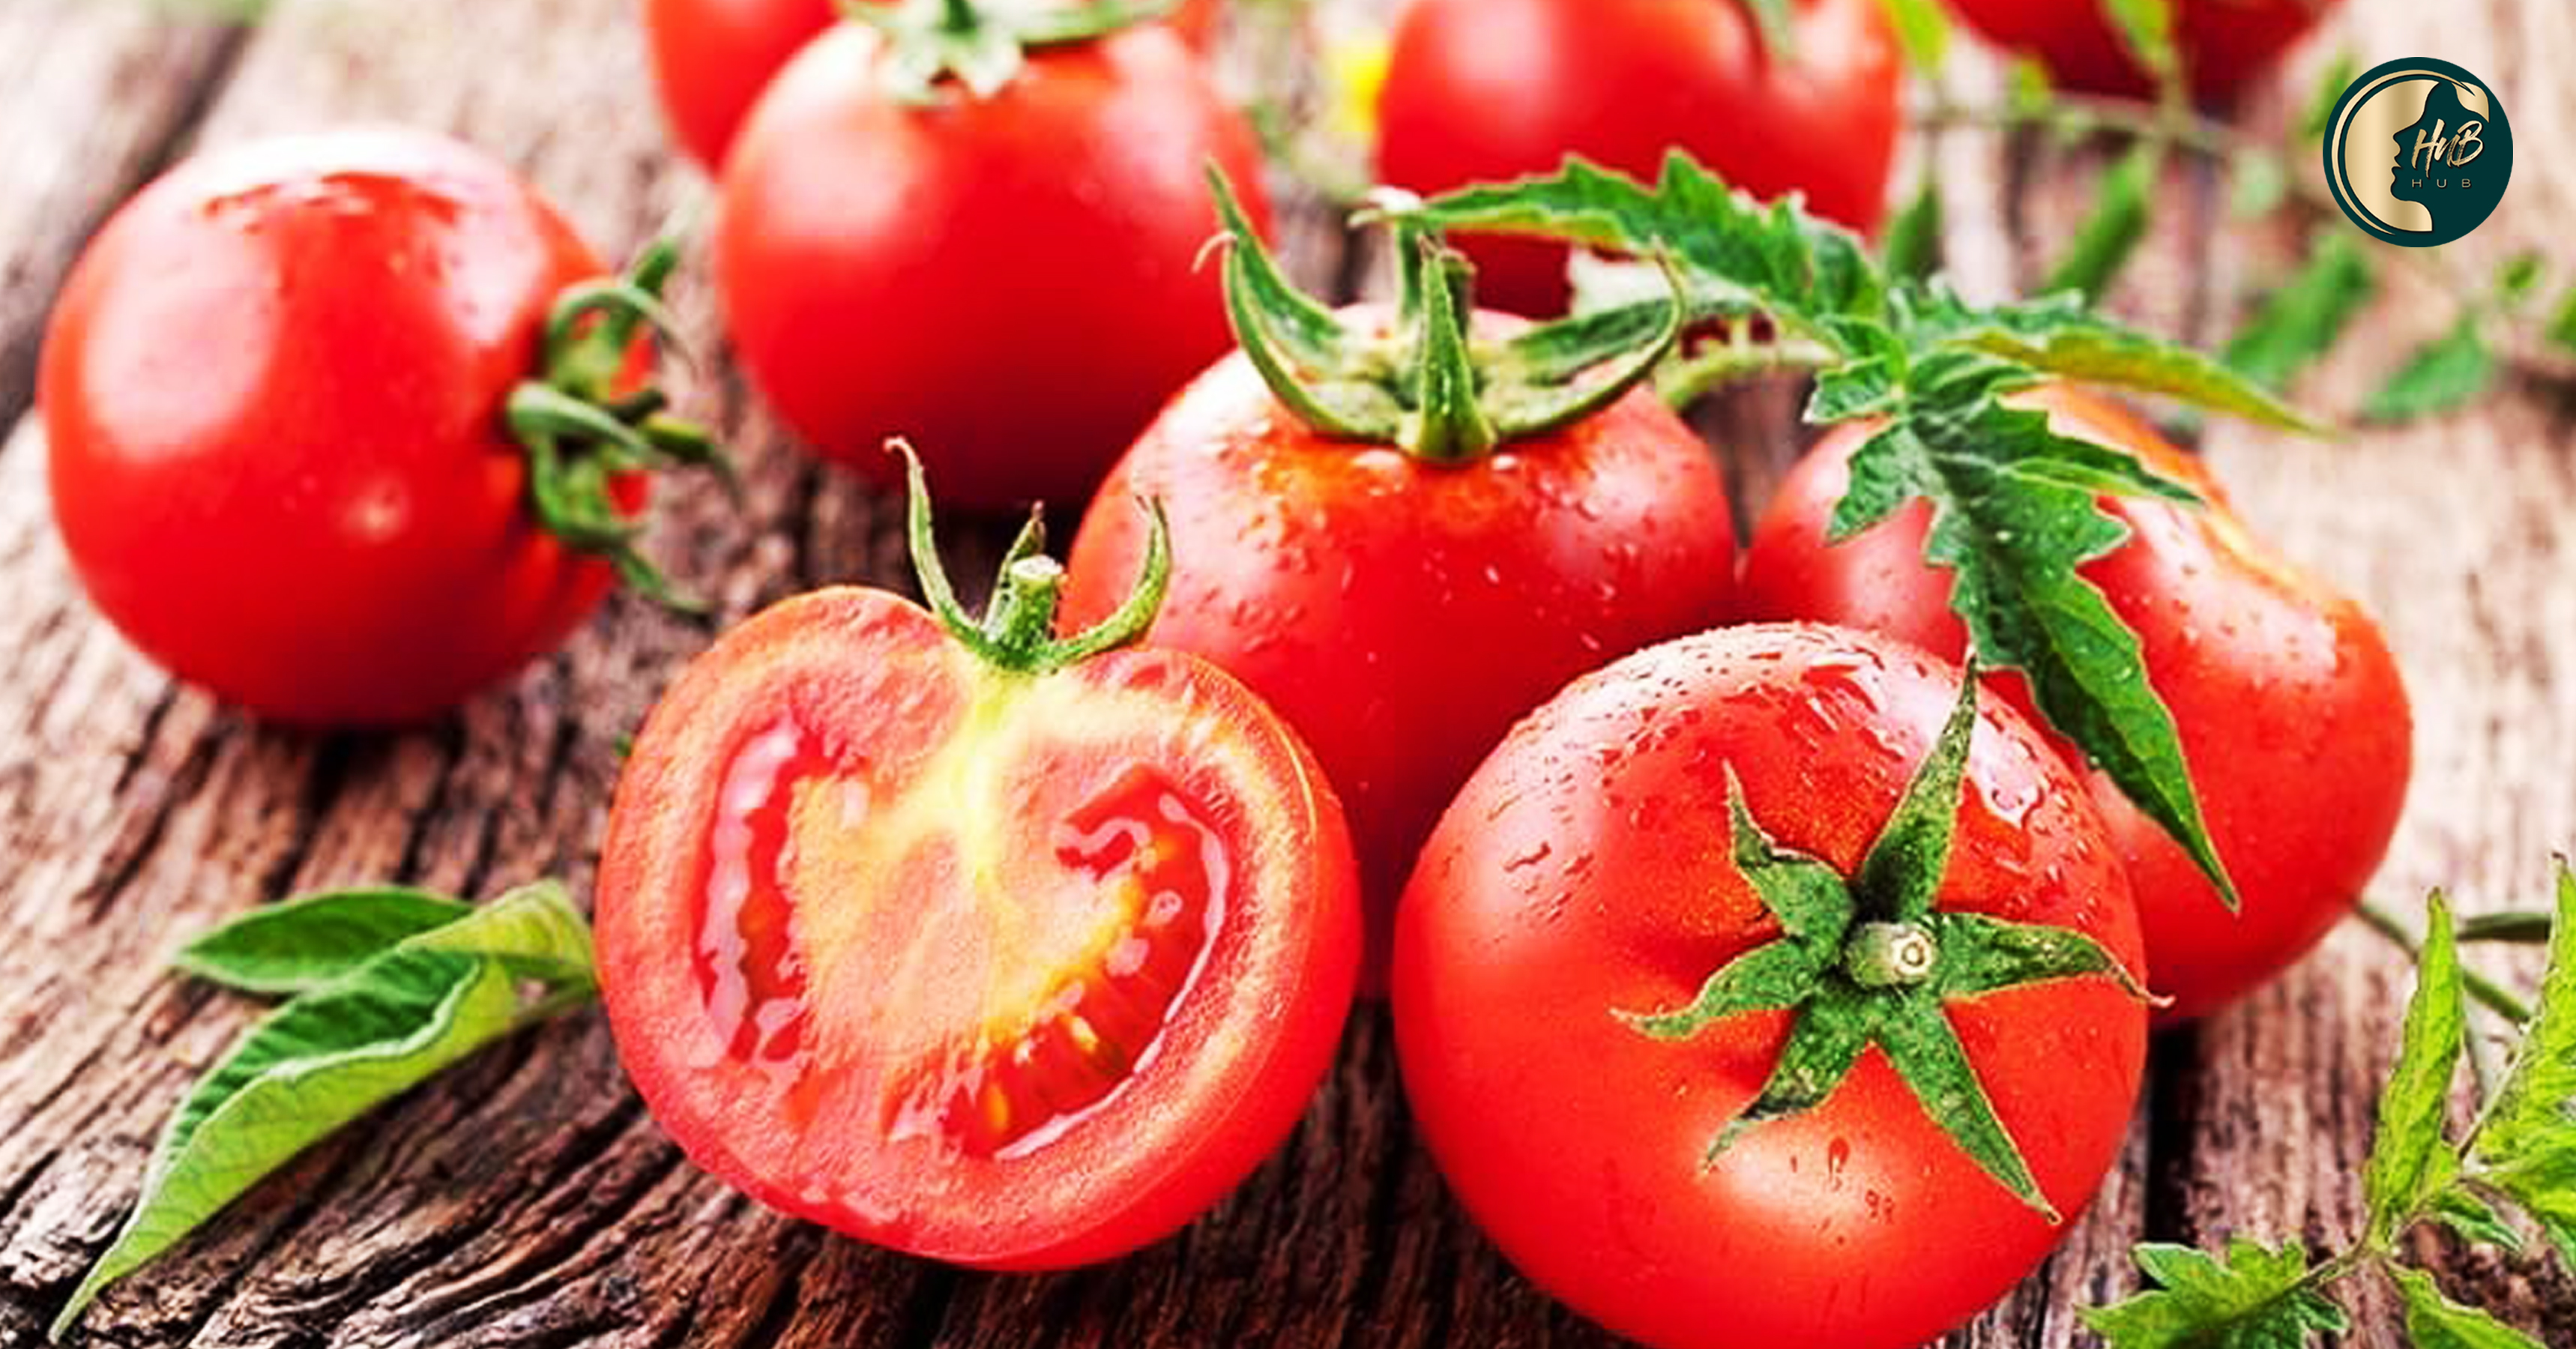 Tomatoes for new Growing and Strong Hair! Health n Beauty HuB